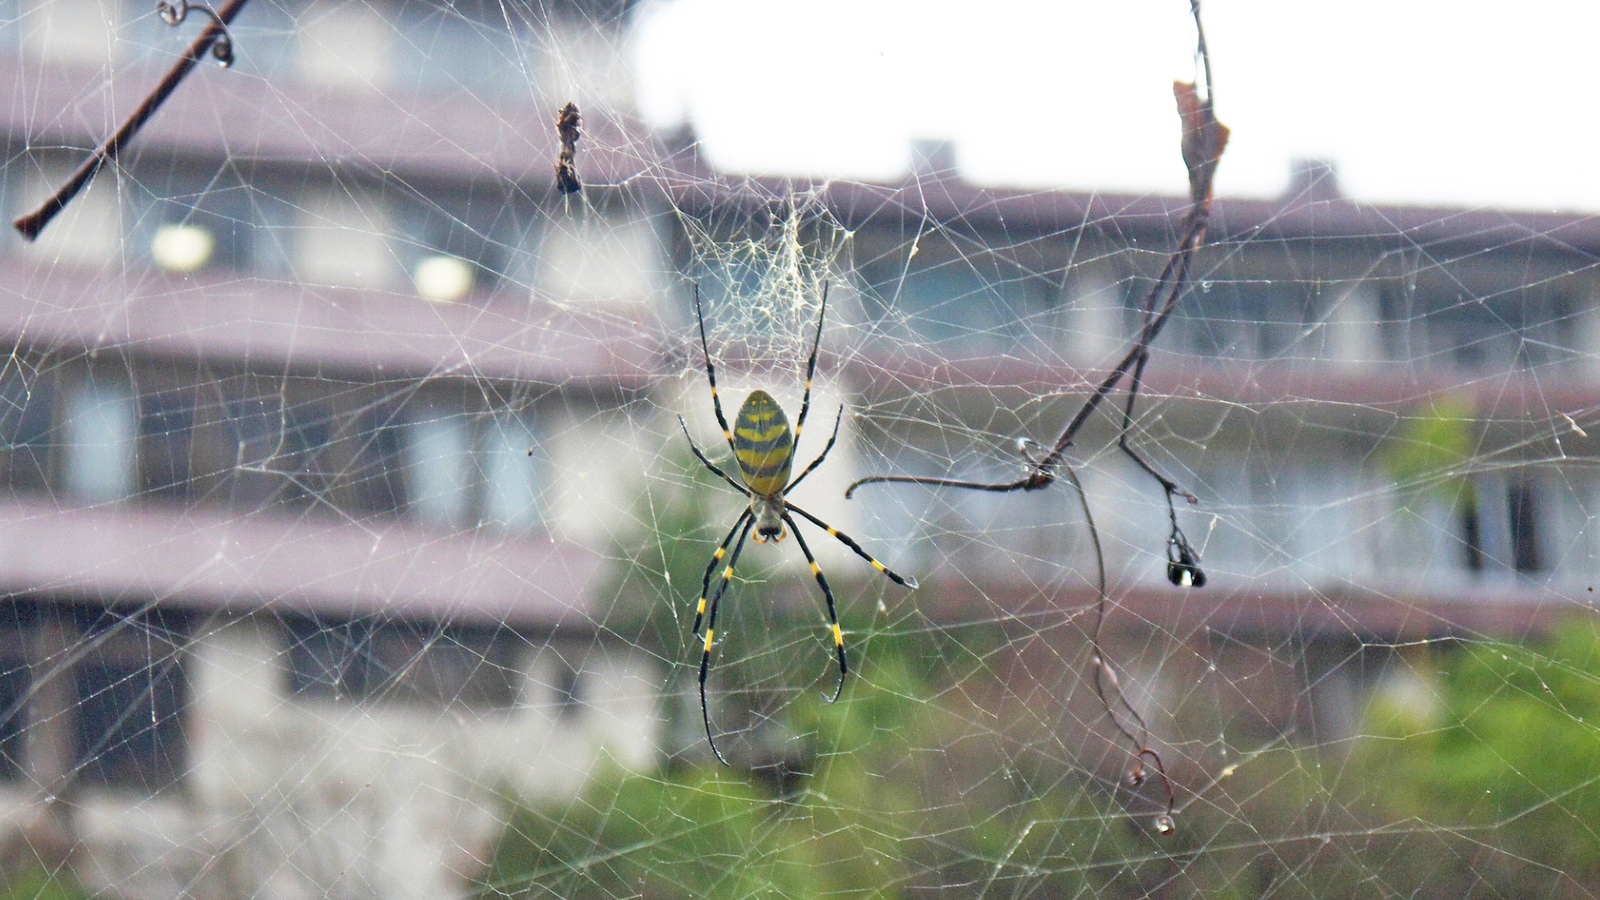 A joro spider in its web in front of a large block of flats